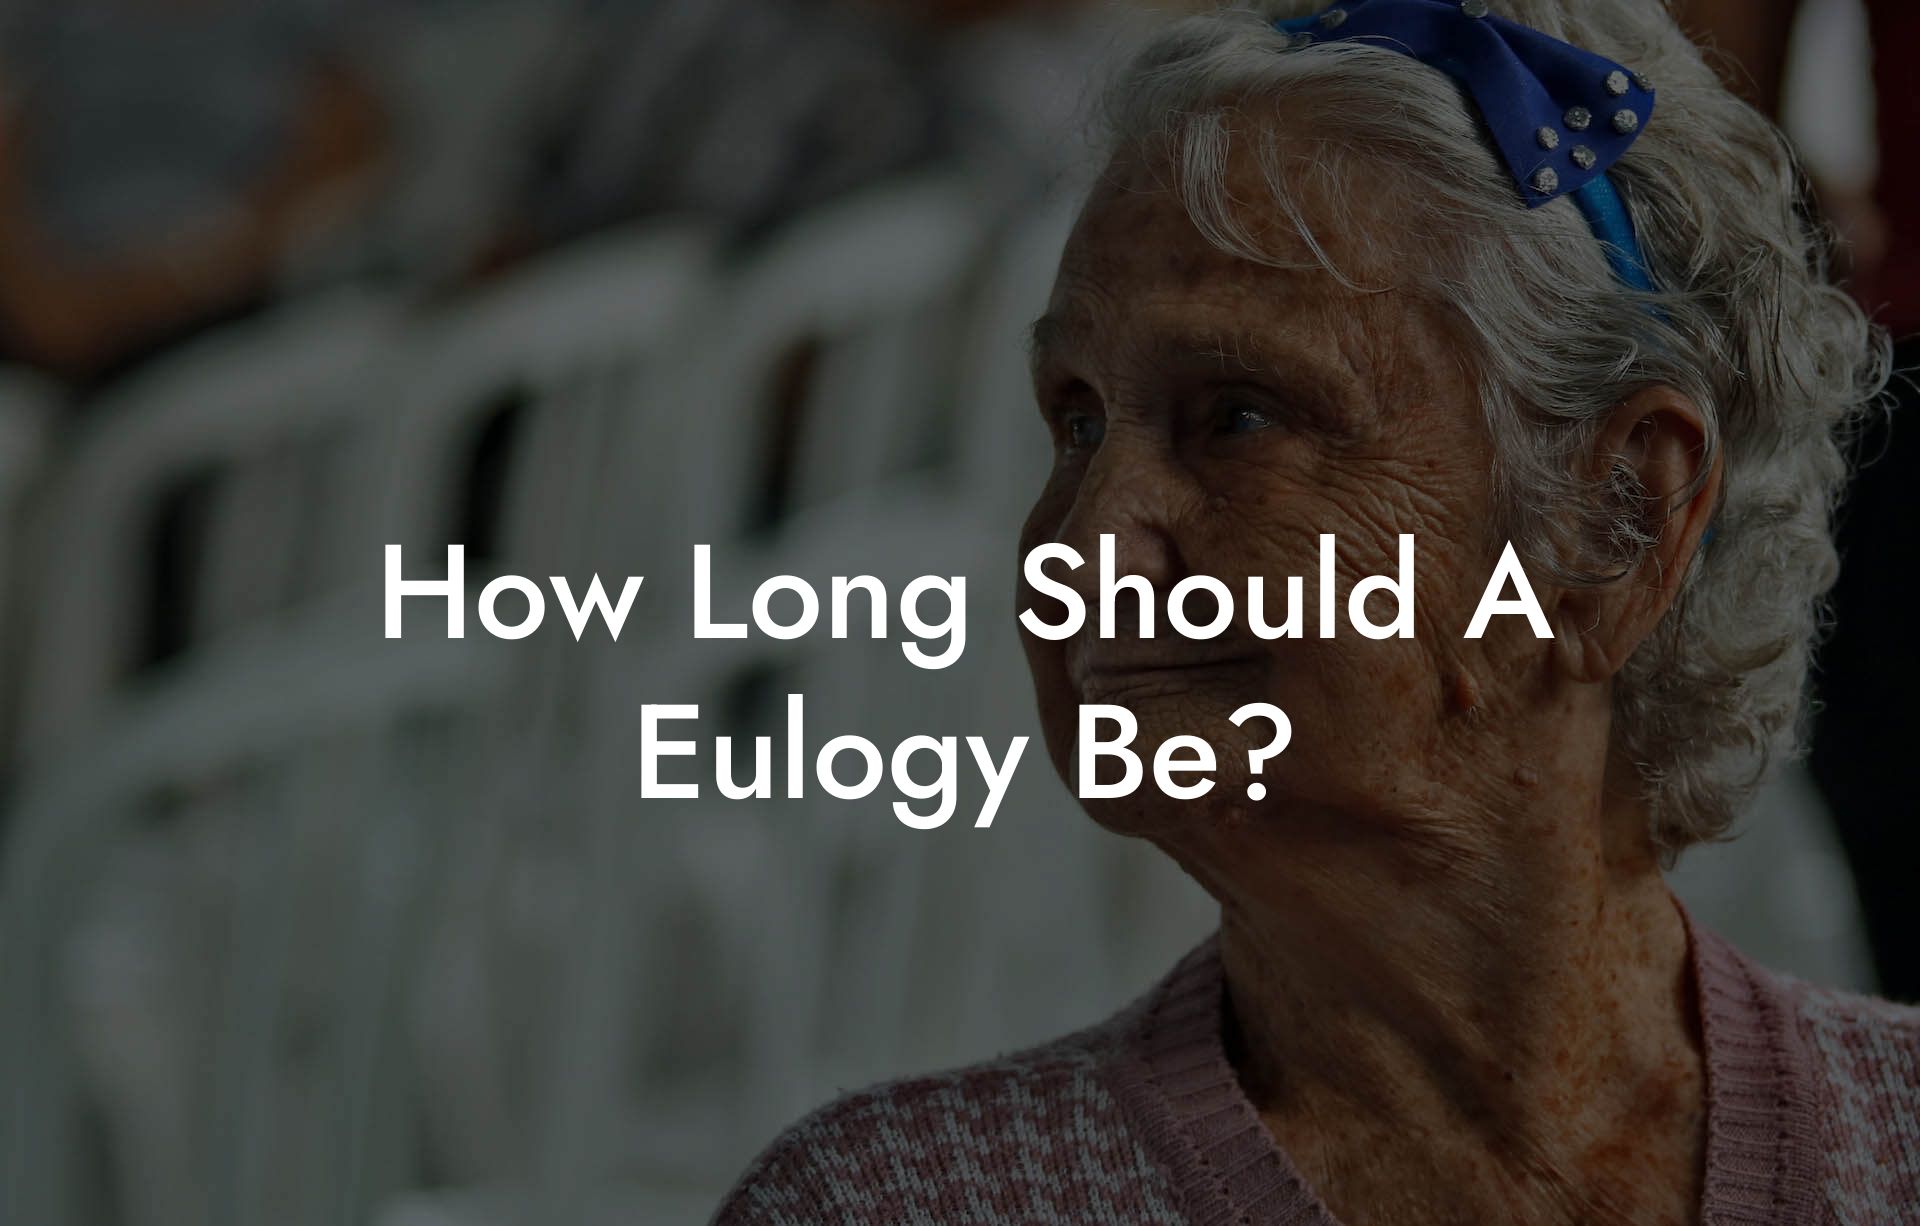 How Long Should A Eulogy Be?